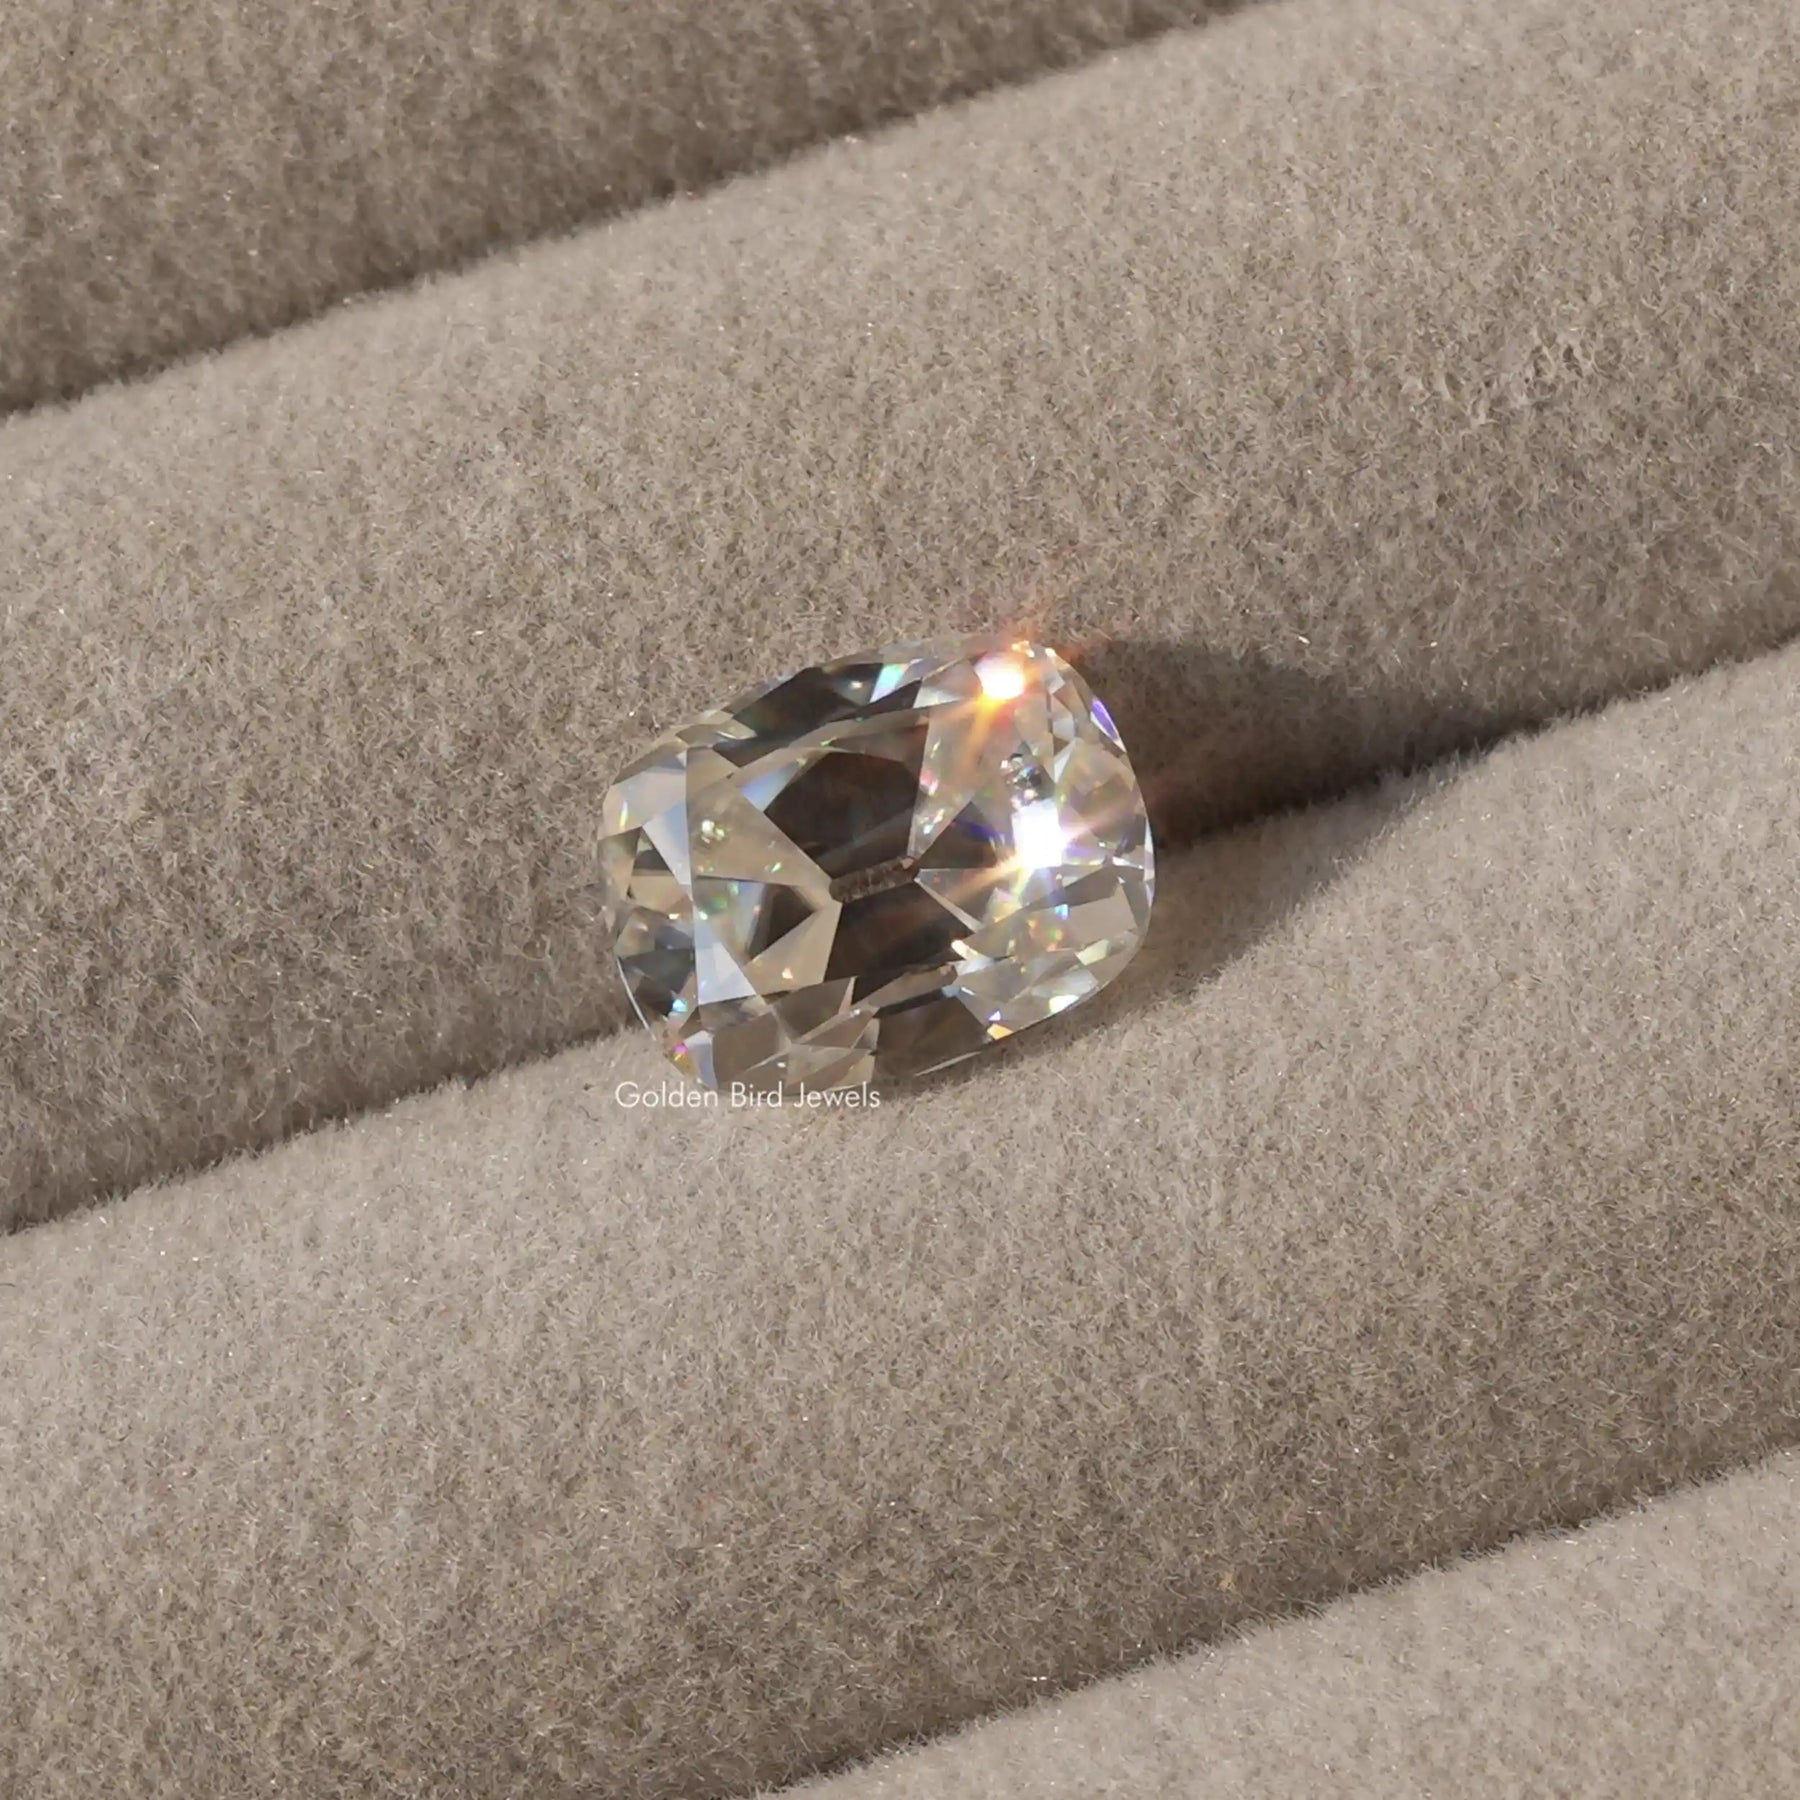 [Top view of cushion cut loose stone made of vvs clarity]-[Golden Bird Jewels]